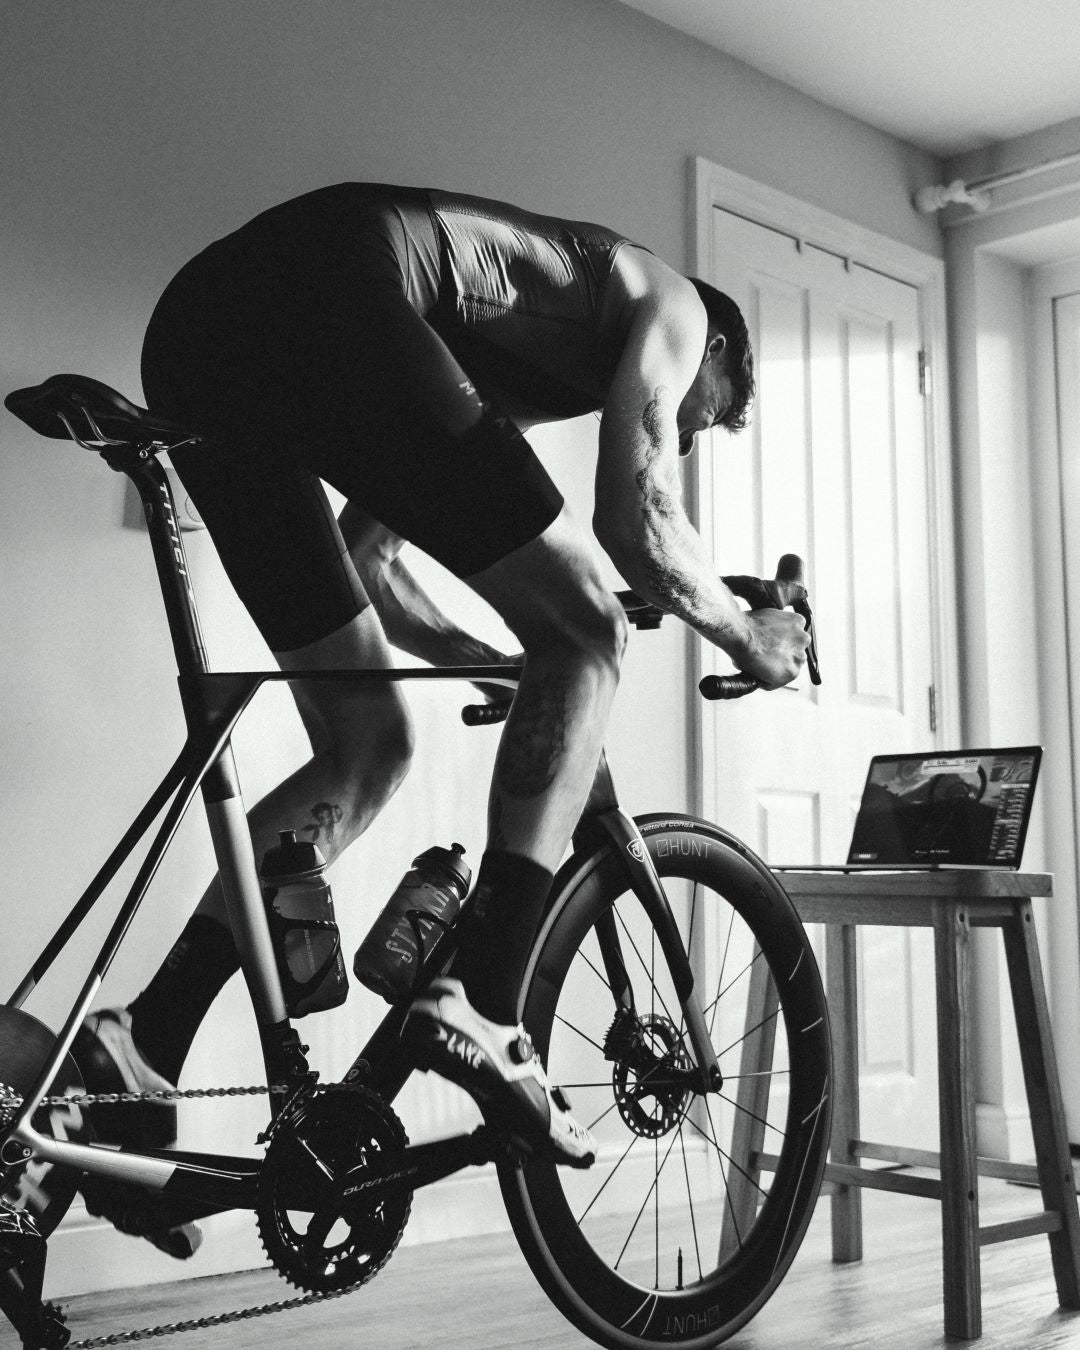 black and white image of athlete indoor cycle training